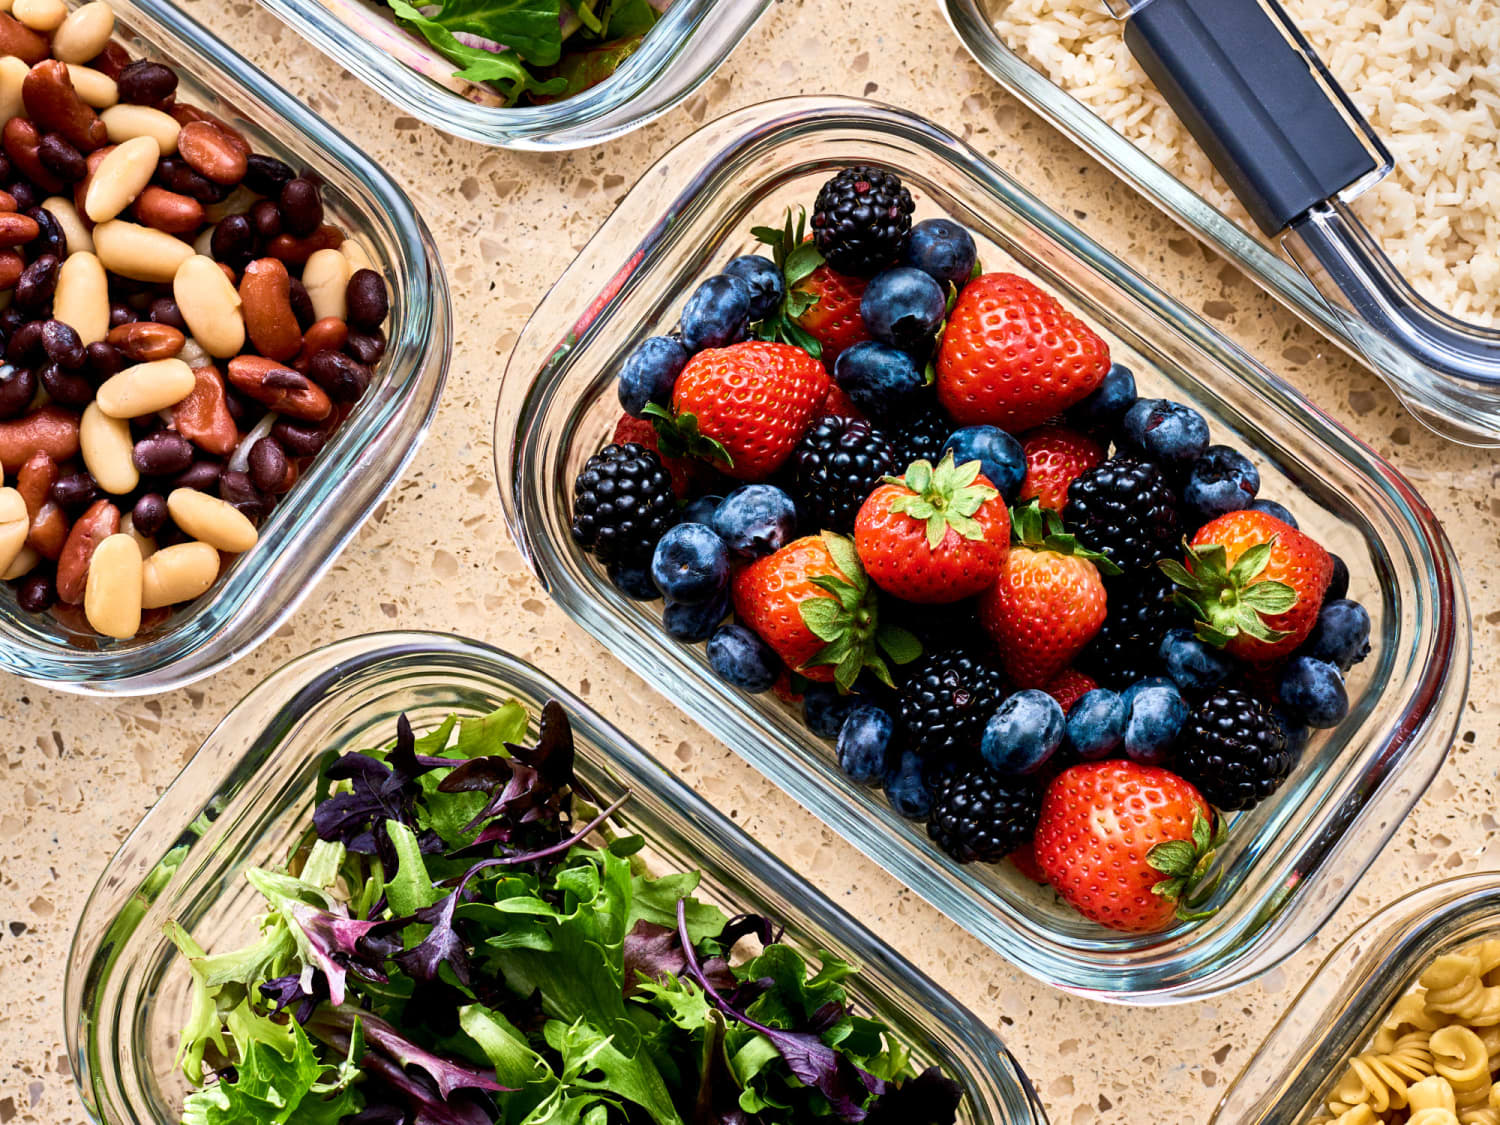 5 Best Food Storage Containers for 2023: Caraway, Snapware, Rubbermaid